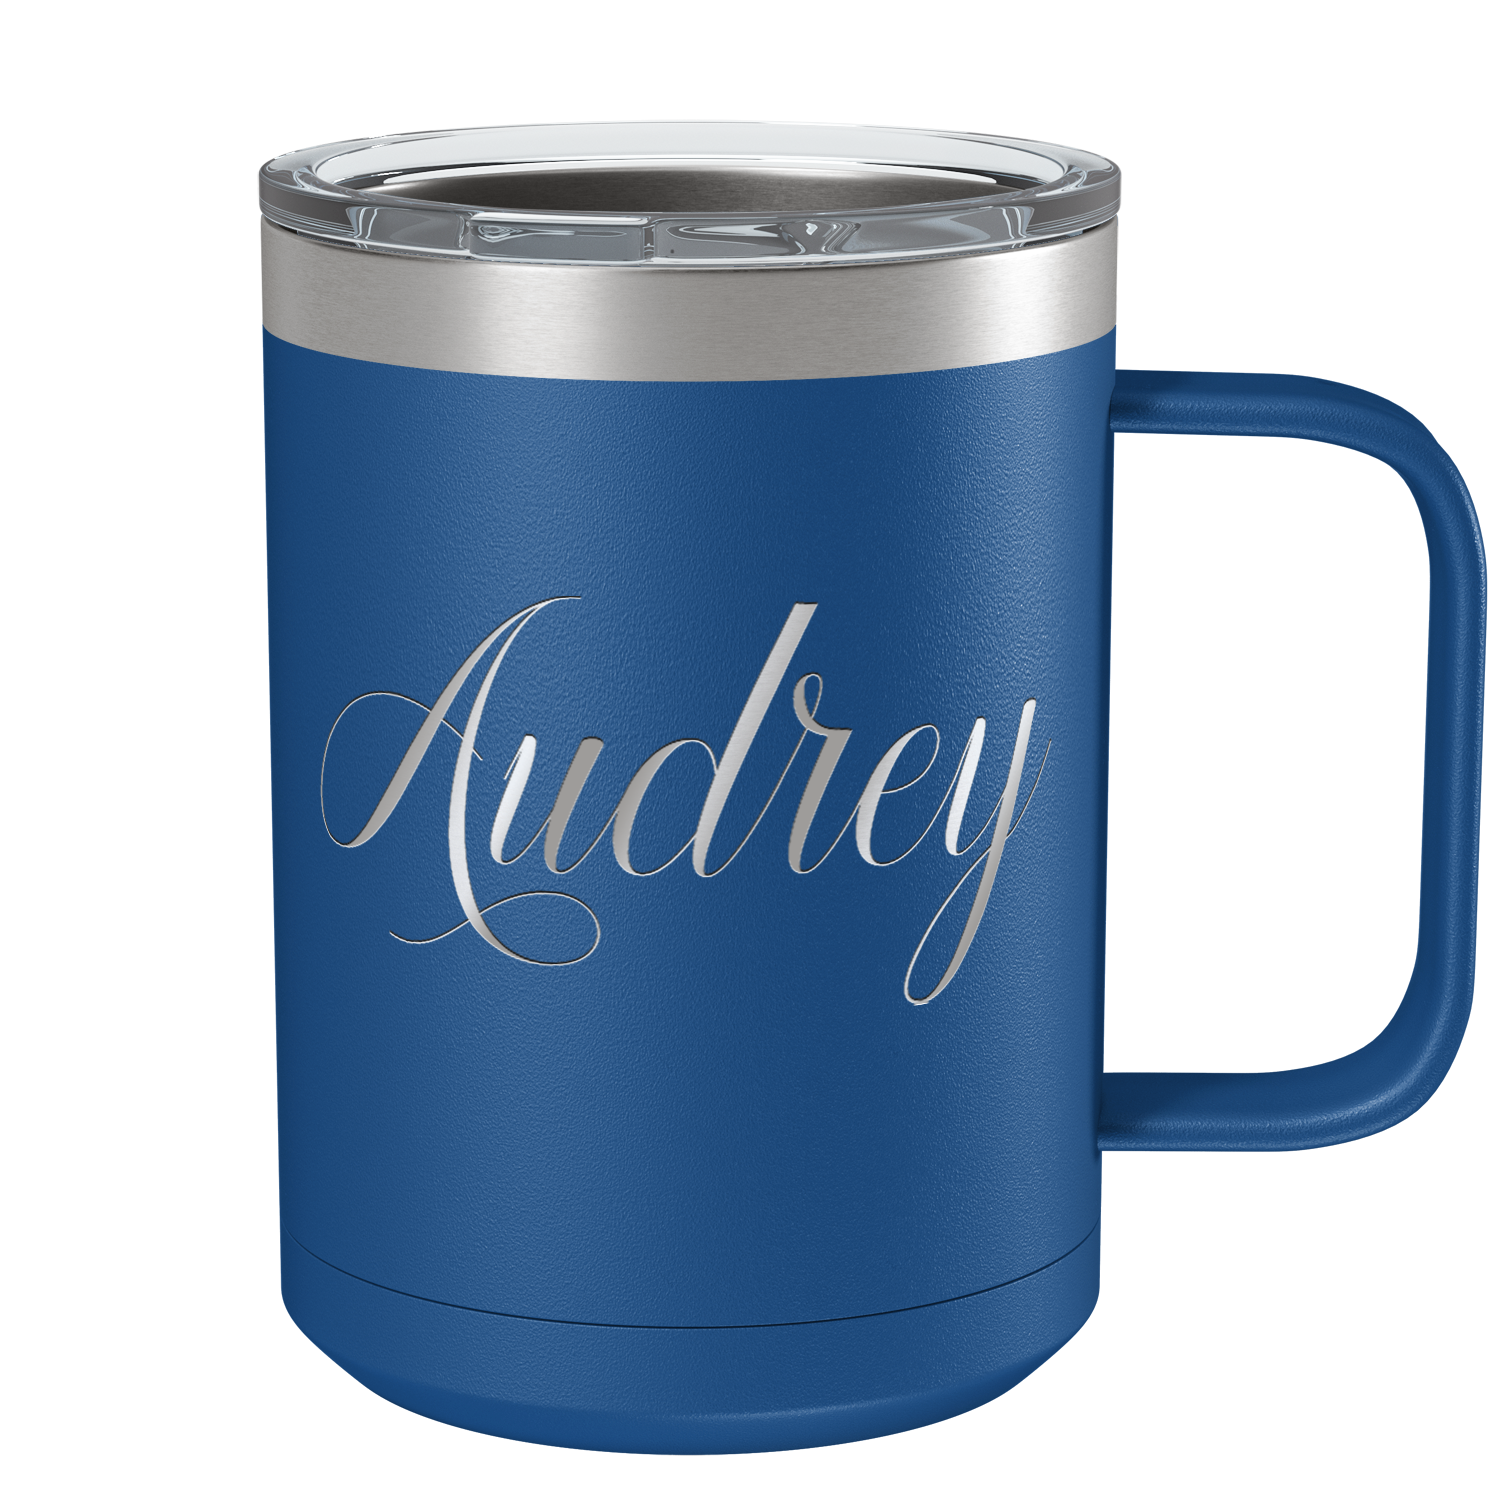 Cuptify Personalized Engraved 15 oz Stainless Steel Coffee Mug - Blue